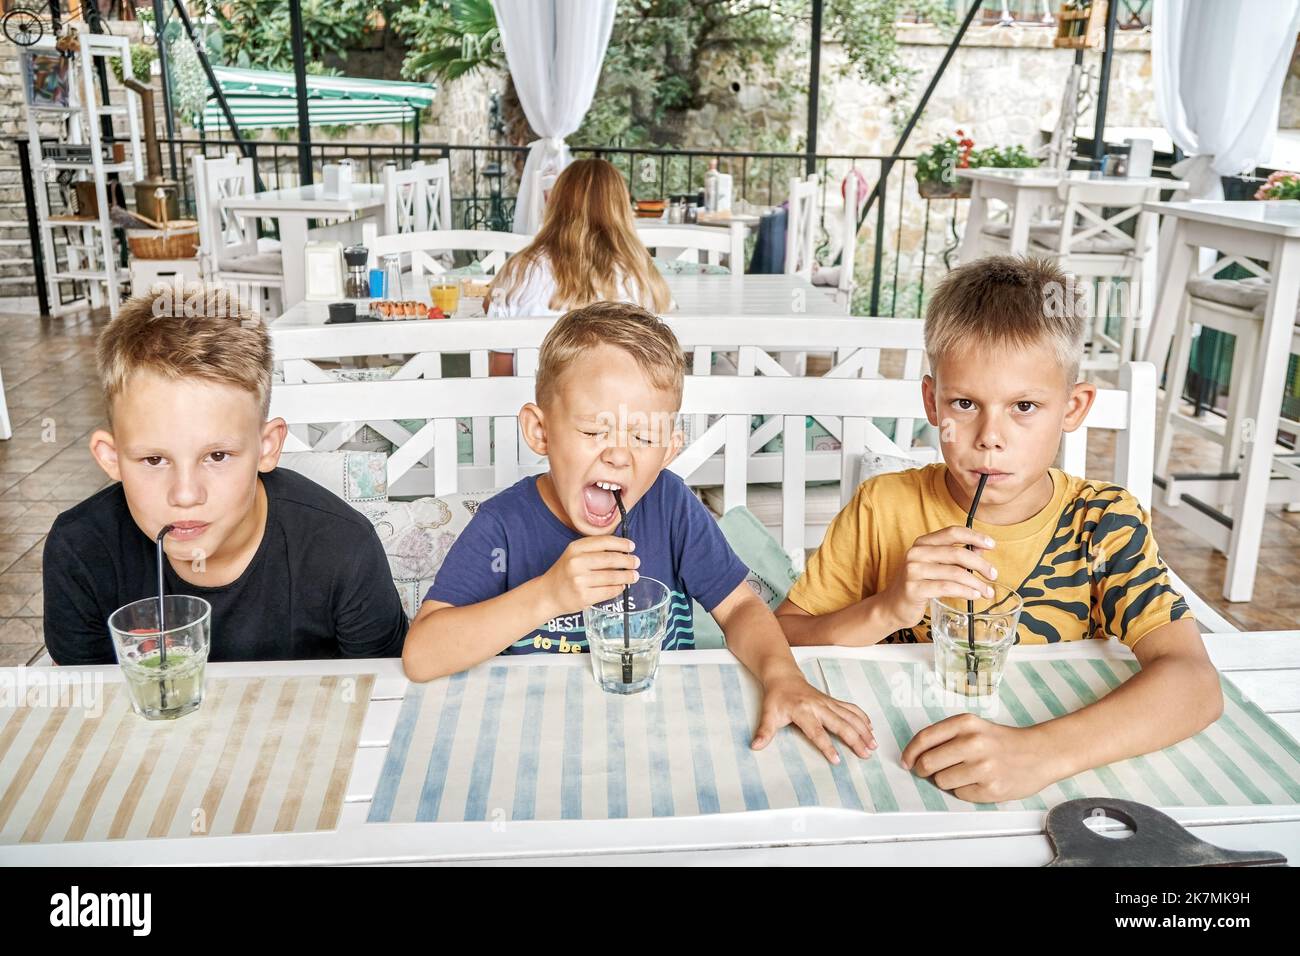 Brothers sit at wooden table in restaurant drinking lemonade from glasses using straws. Siblings enjoy going together to restaurant to taste meals Stock Photo